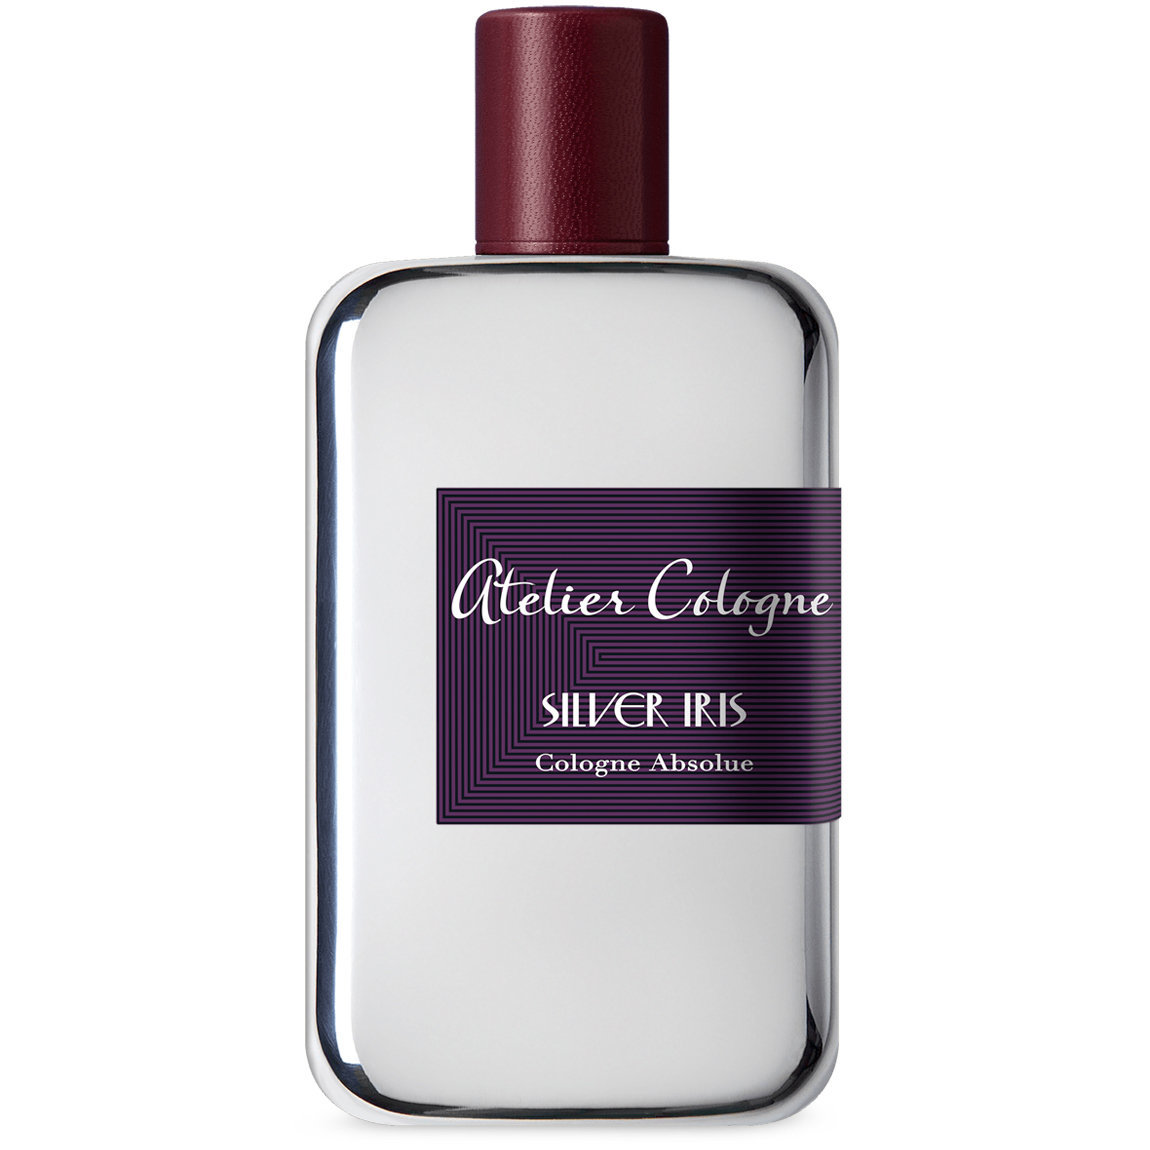 Atelier Cologne Silver Iris 200 ml alternative view 1 - product swatch.